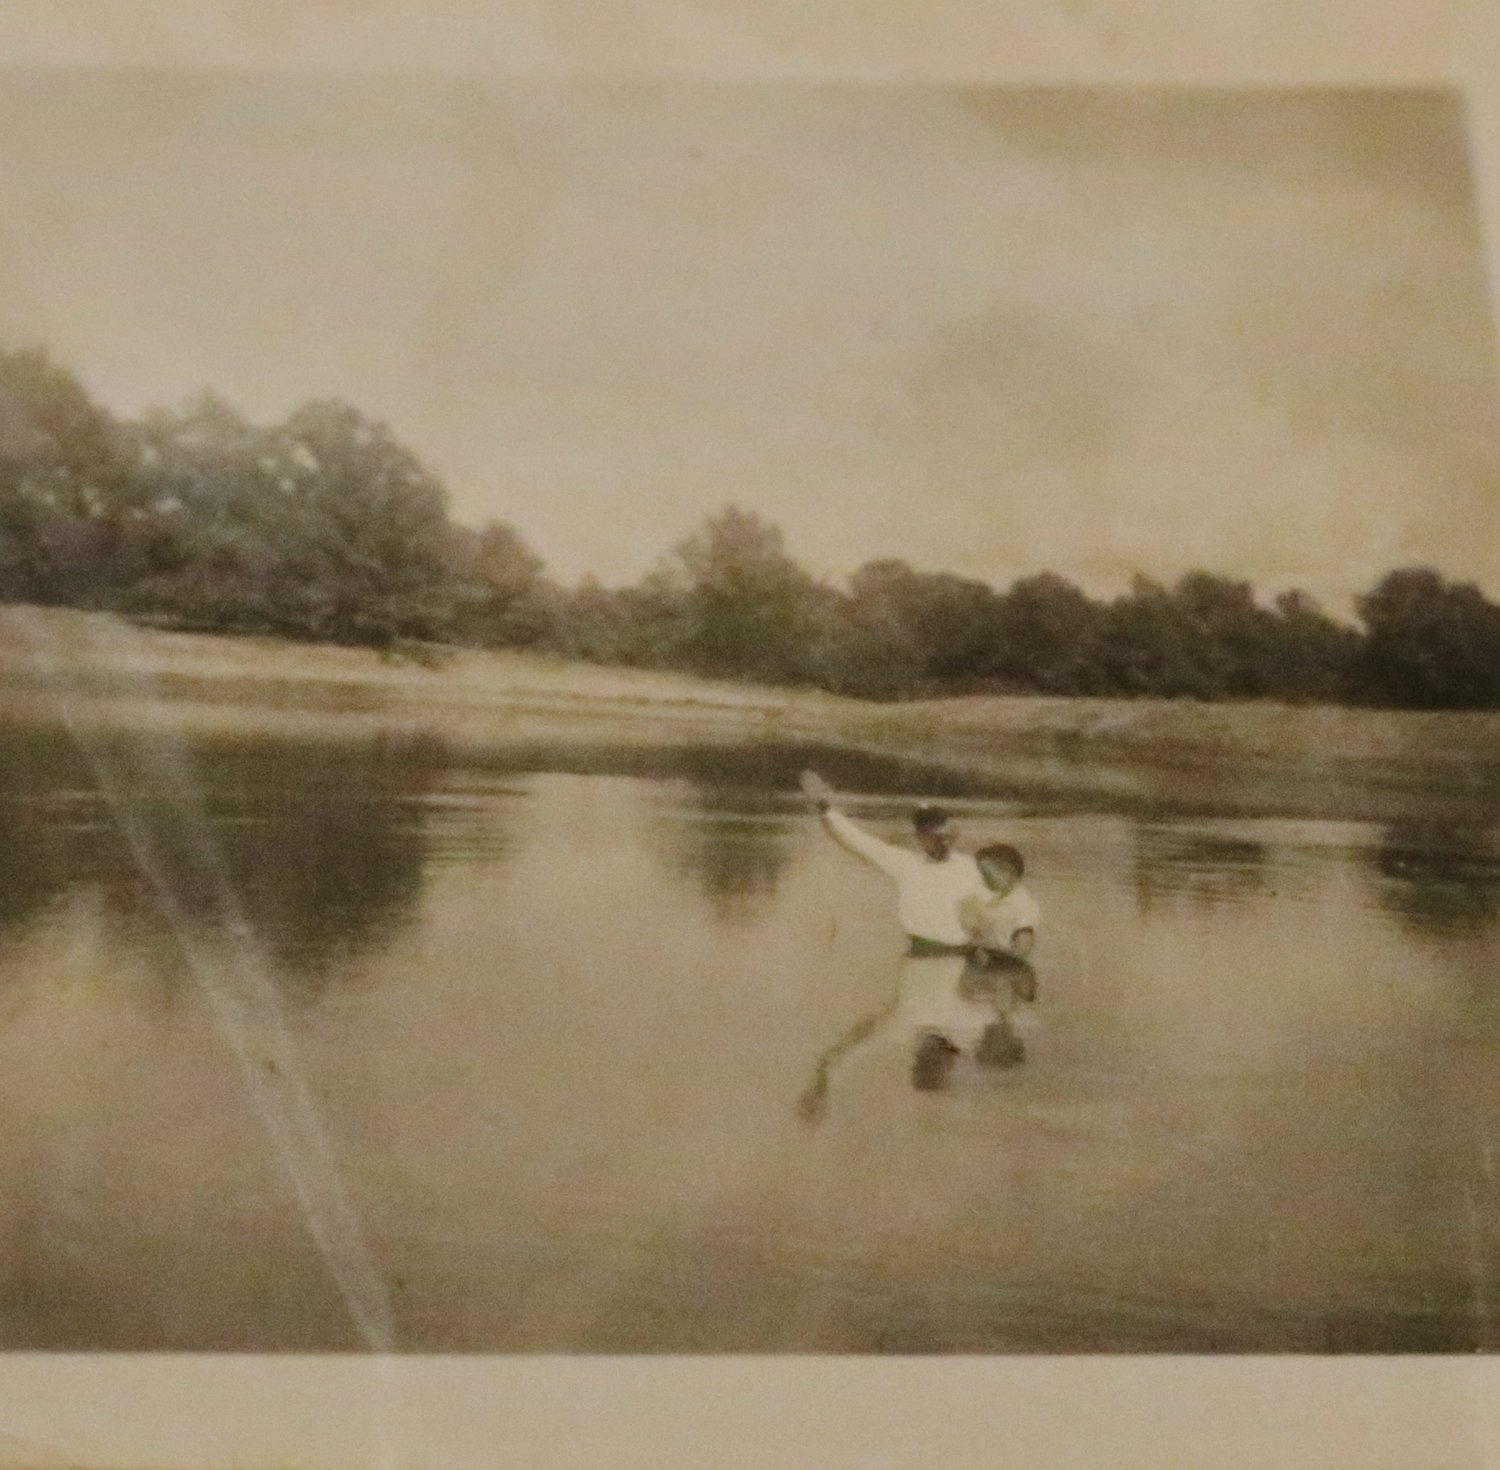 Young Robert Holland’s baptism at a pond on the family’s holding in Golden.